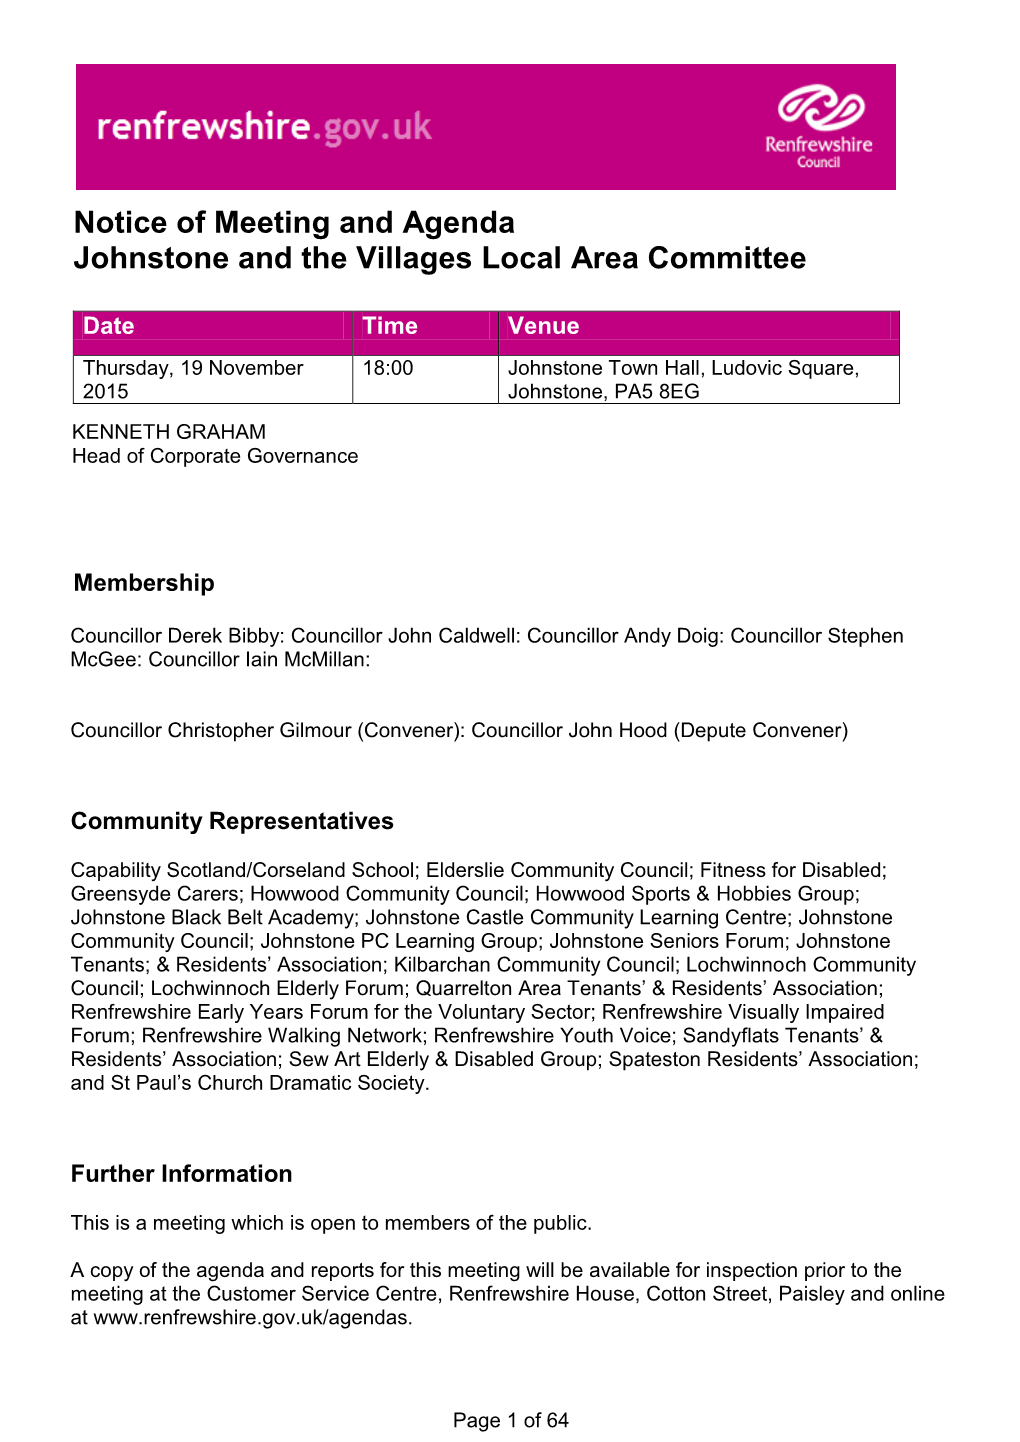 Notice of Meeting and Agenda Johnstone and the Villages Local Area Committee